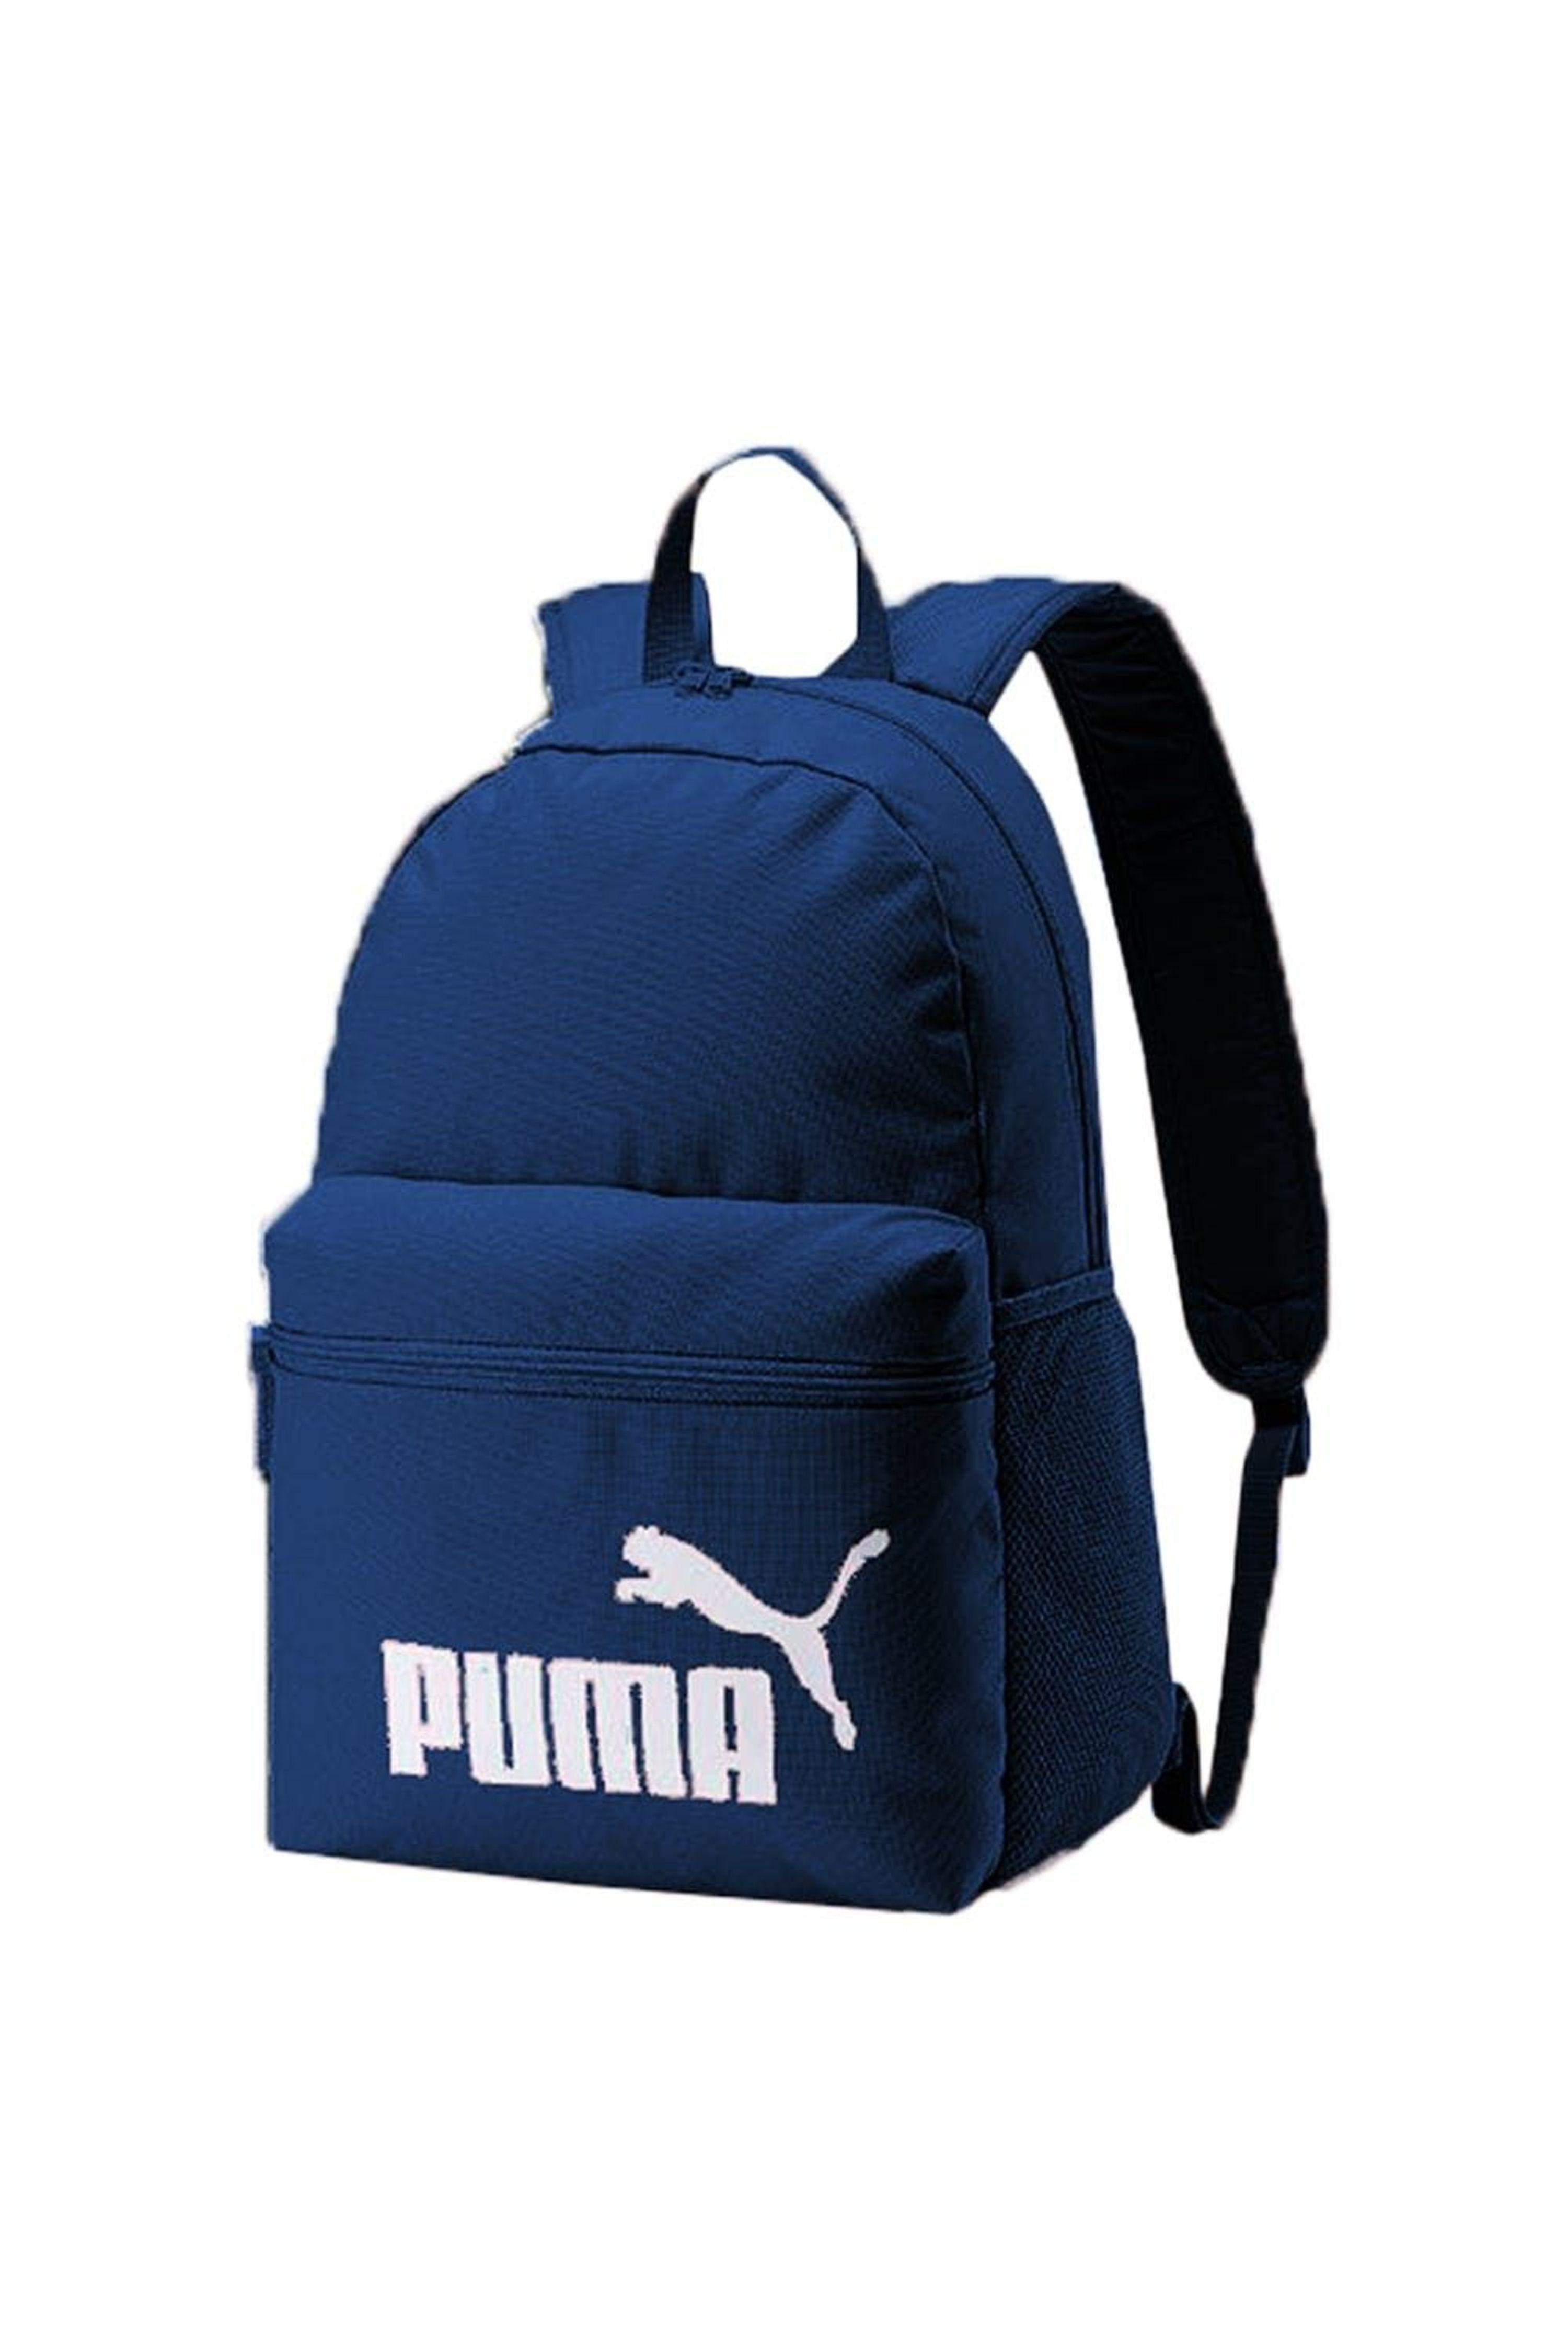 Puma Unisex-Adult Core Backpack V2, Star Sapphire (9018603) : Amazon.in:  Fashion